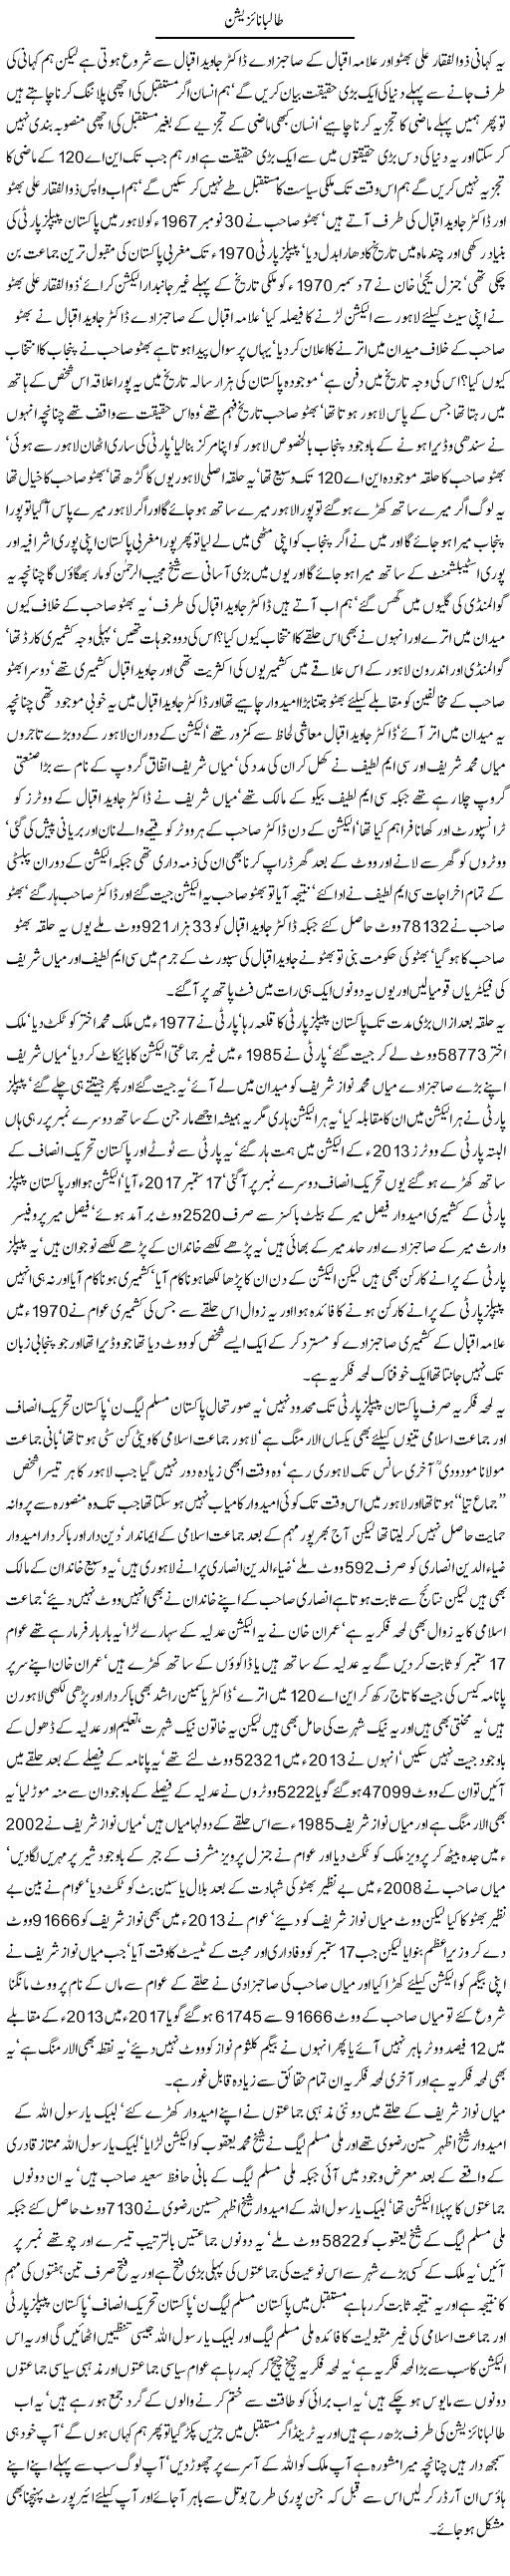 Talibnization By Javed Chaudhry